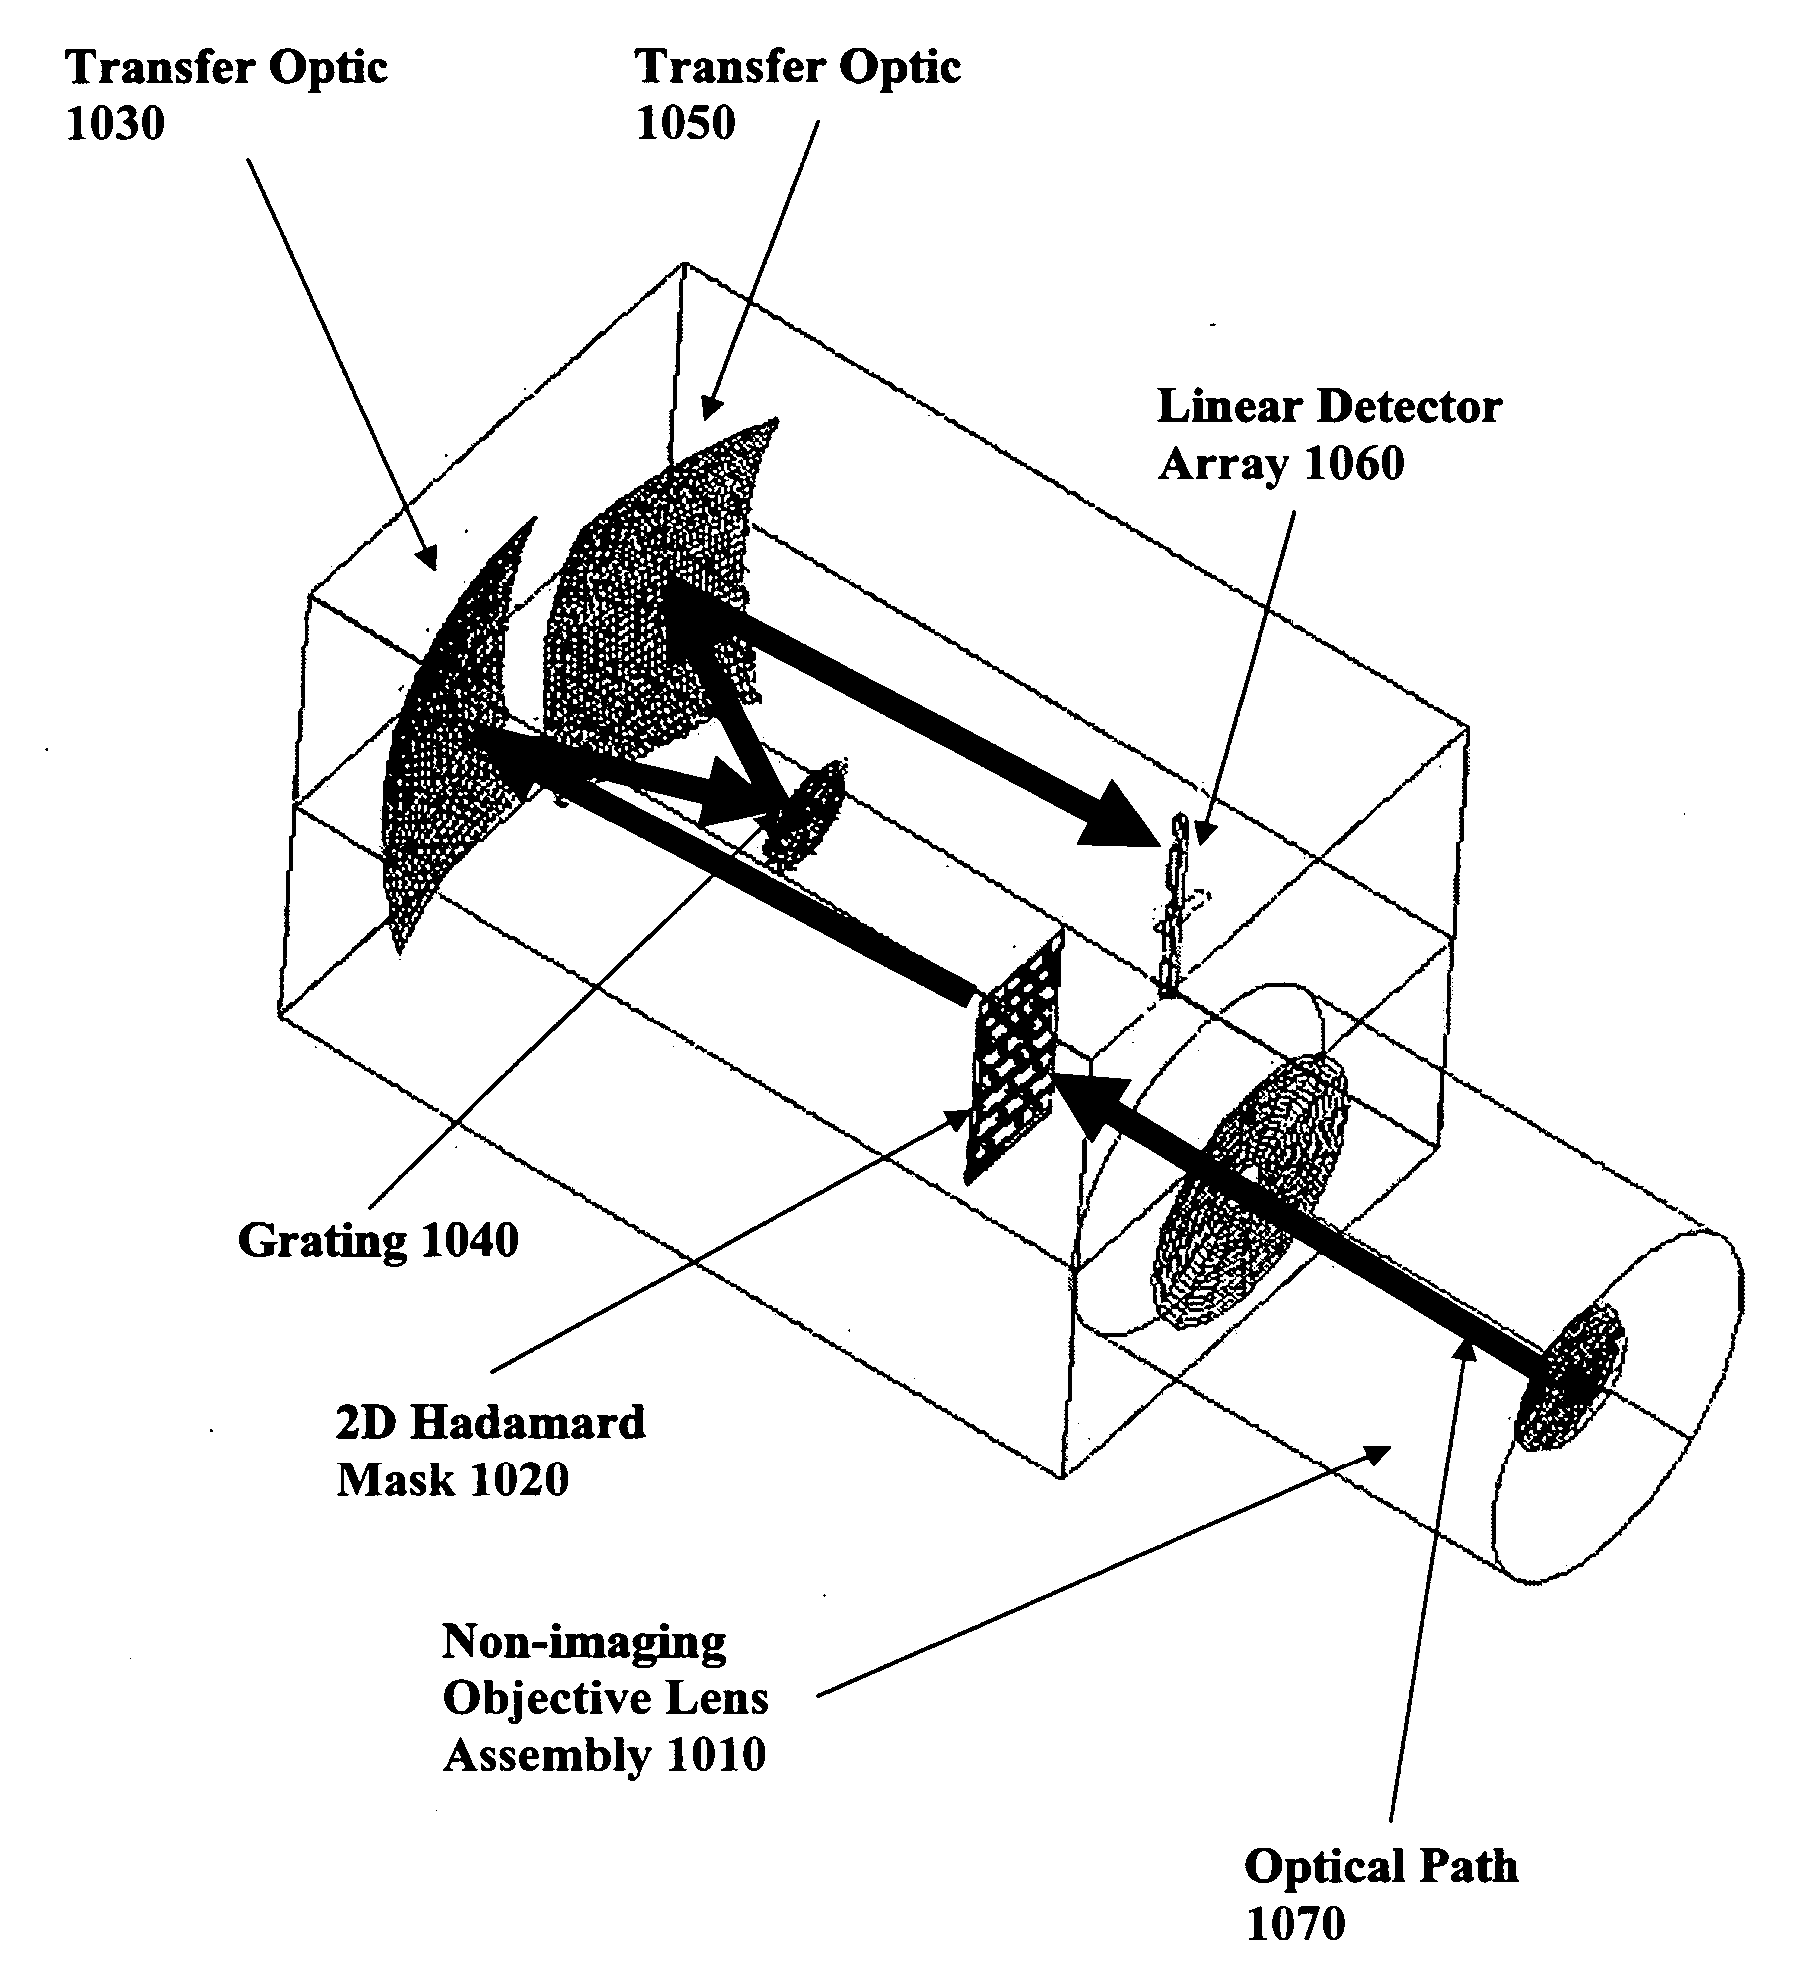 Devices and method for spectral measurements